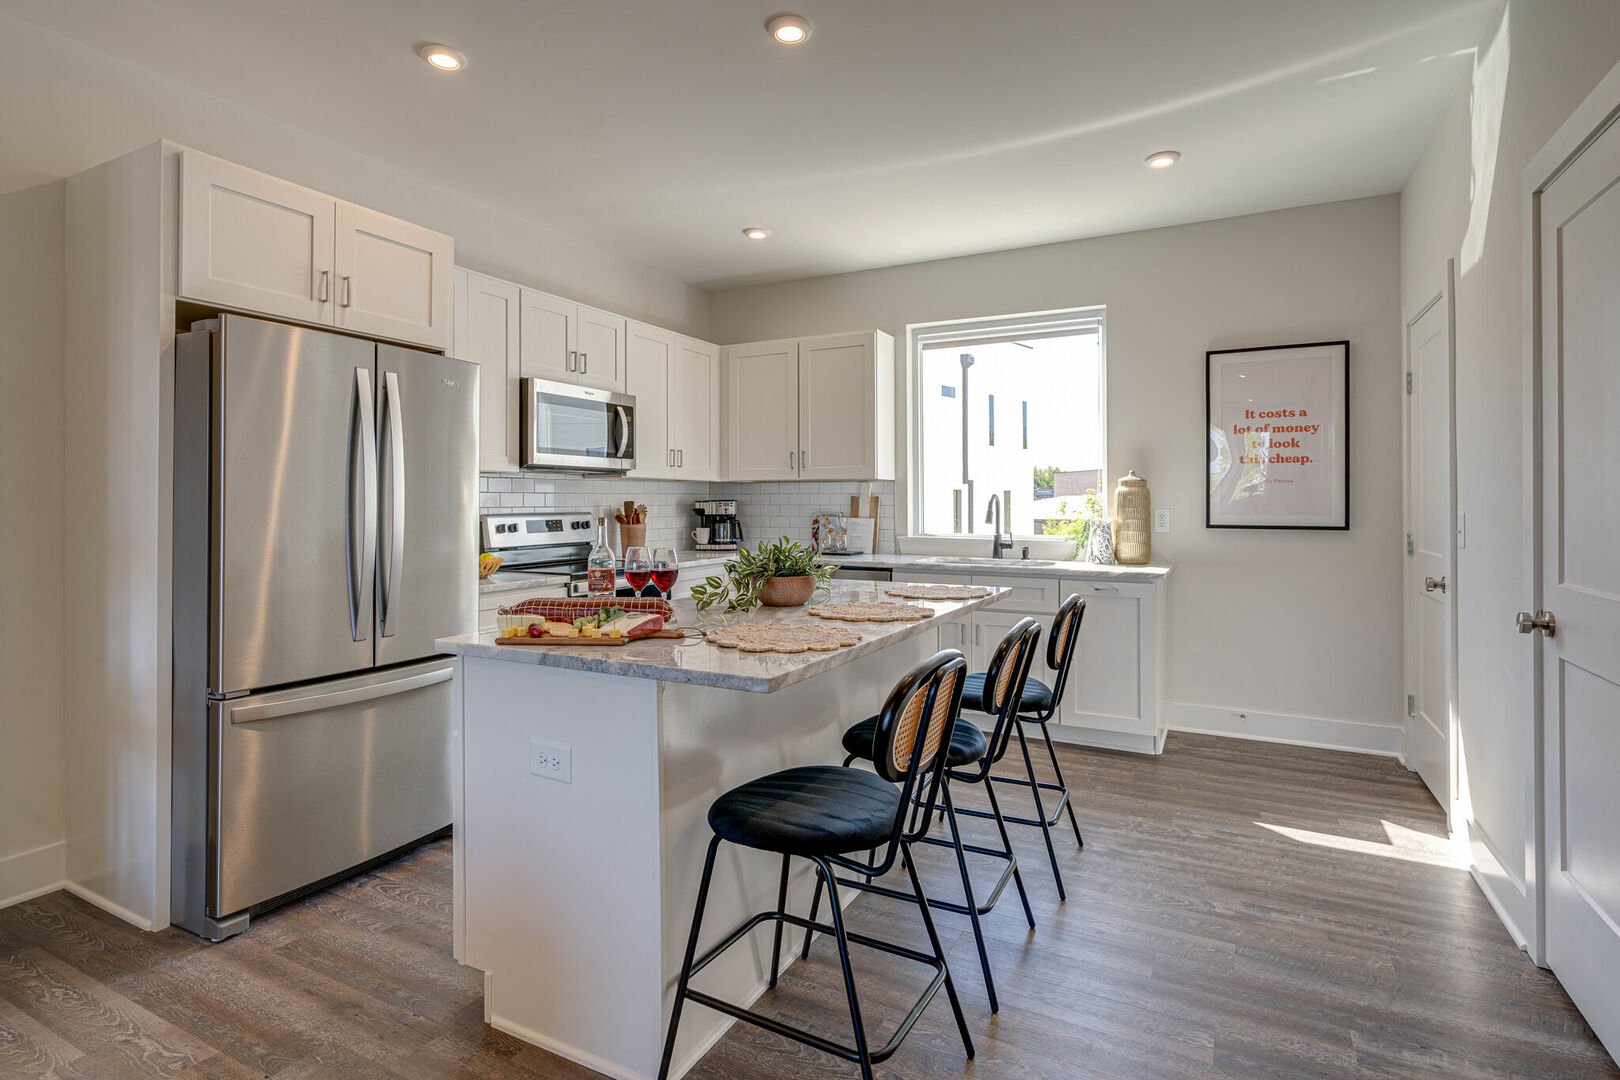 Open kitchen with stainless steel appliances, large island, breakfast bar seating, and is fully equipped with your basic cooking essentials. (2nd Floor) -Unit 2-